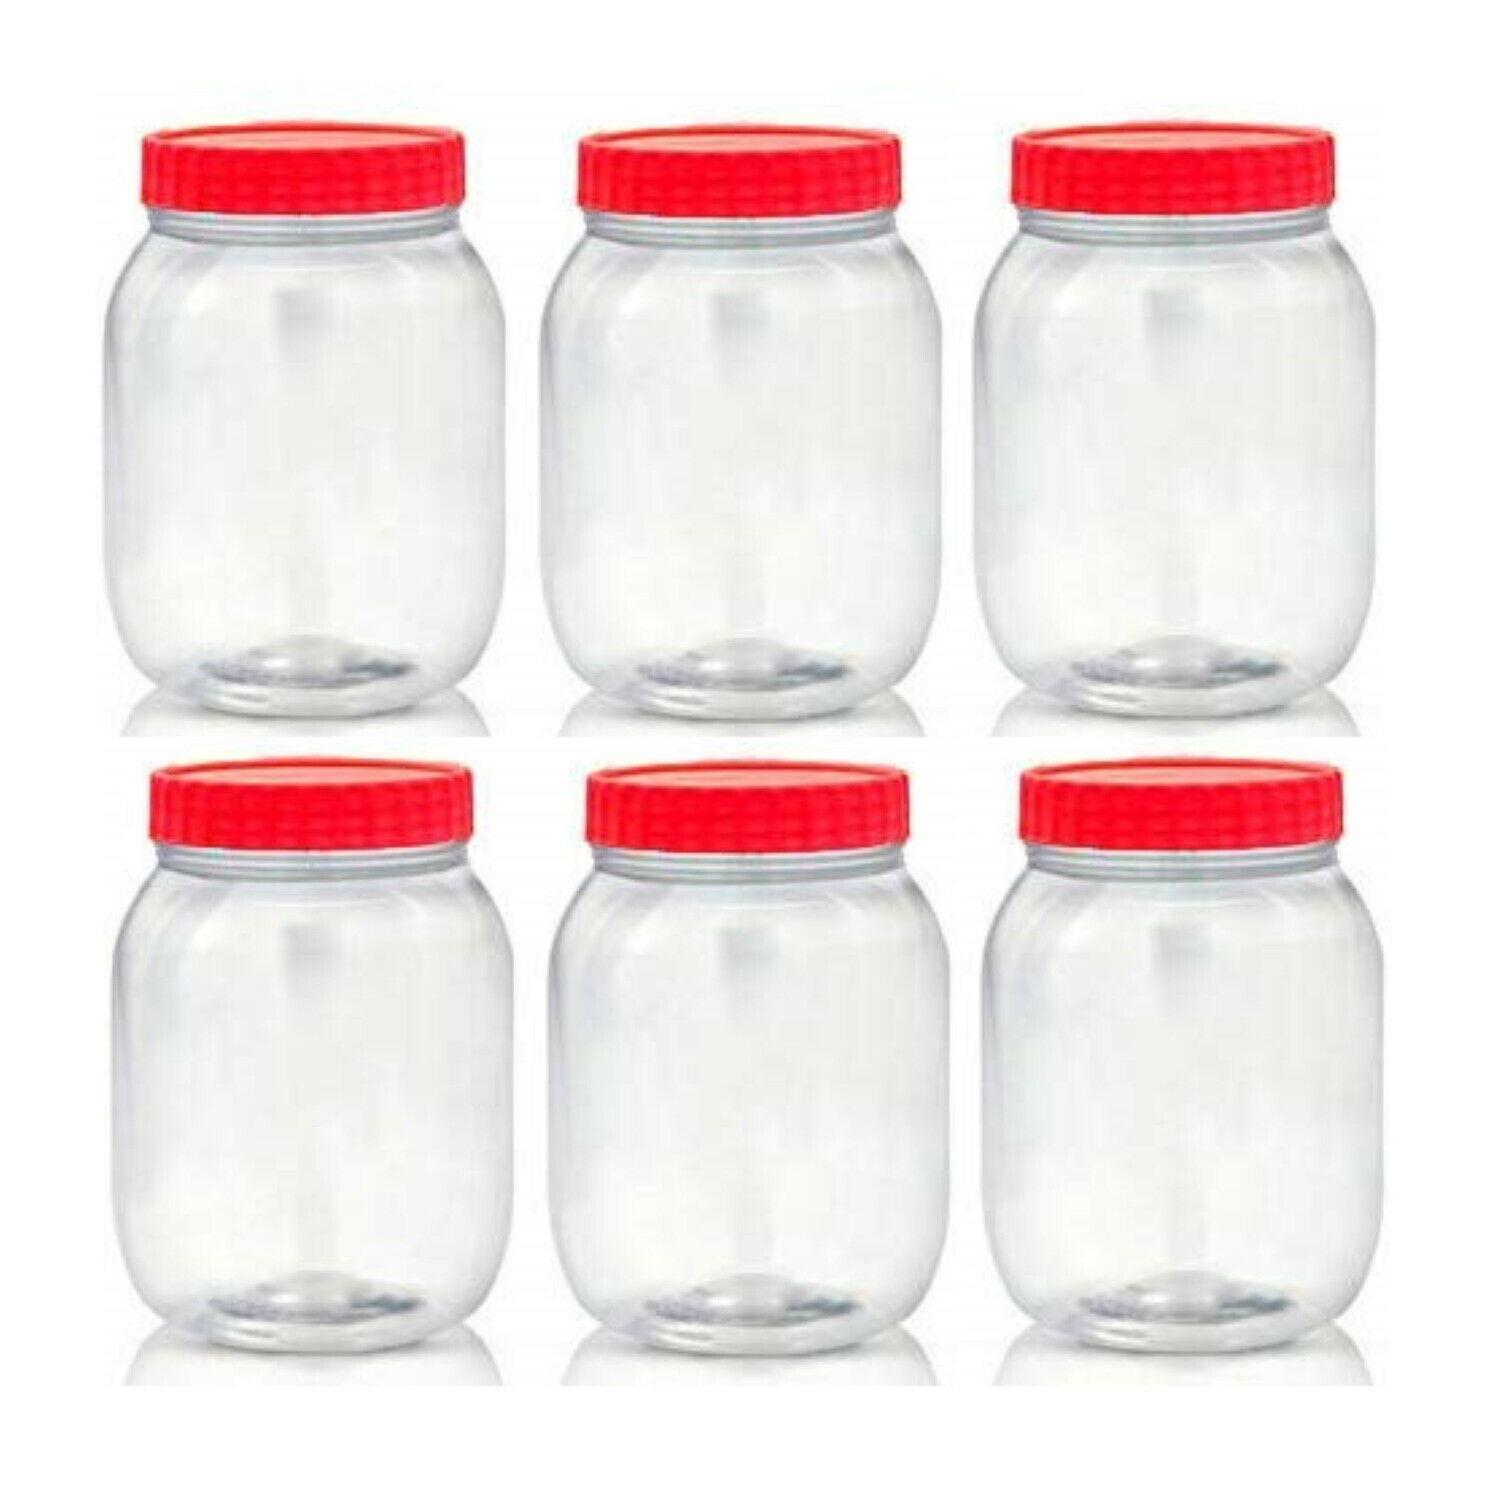 750 ml Crystal Clear PET Plastic Wine Bottle with Black Screw-Top lid 12-Pack 